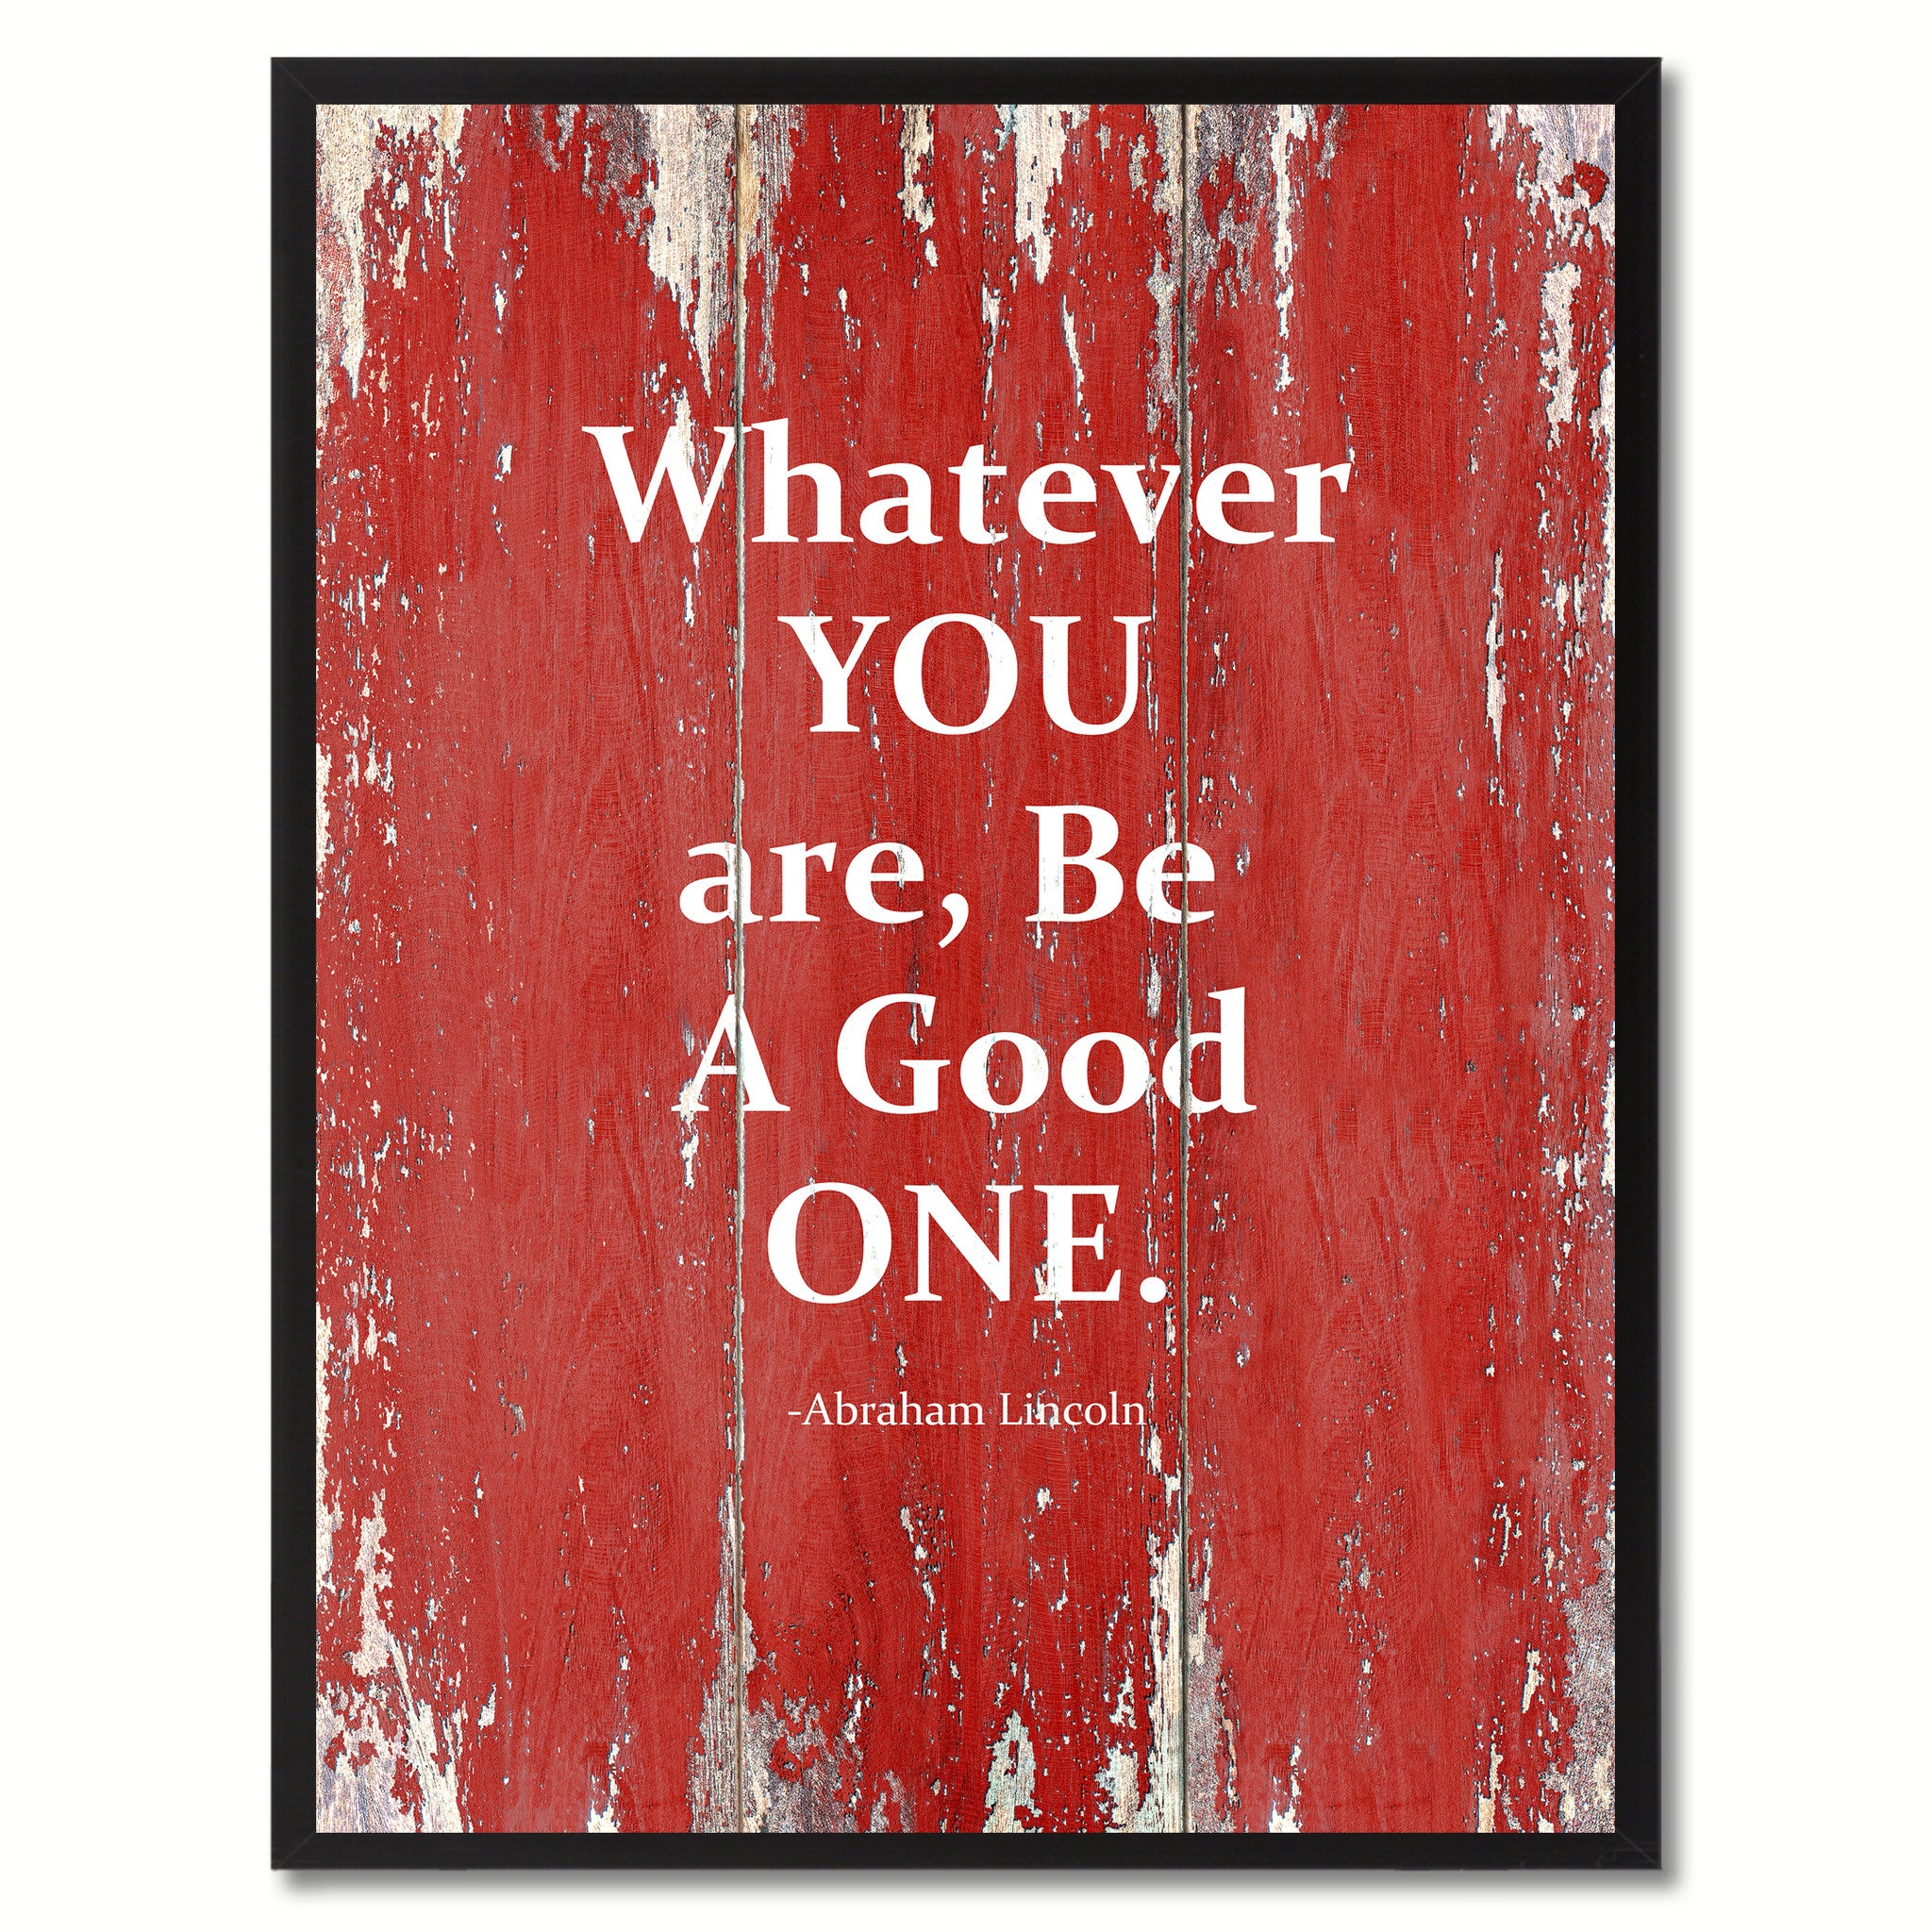 Whatever You Are, Be A Good One Abraham Lincoln Saying Motivation Quote Canvas Print, Black Picture Frame Home Decor Wall Art Gifts